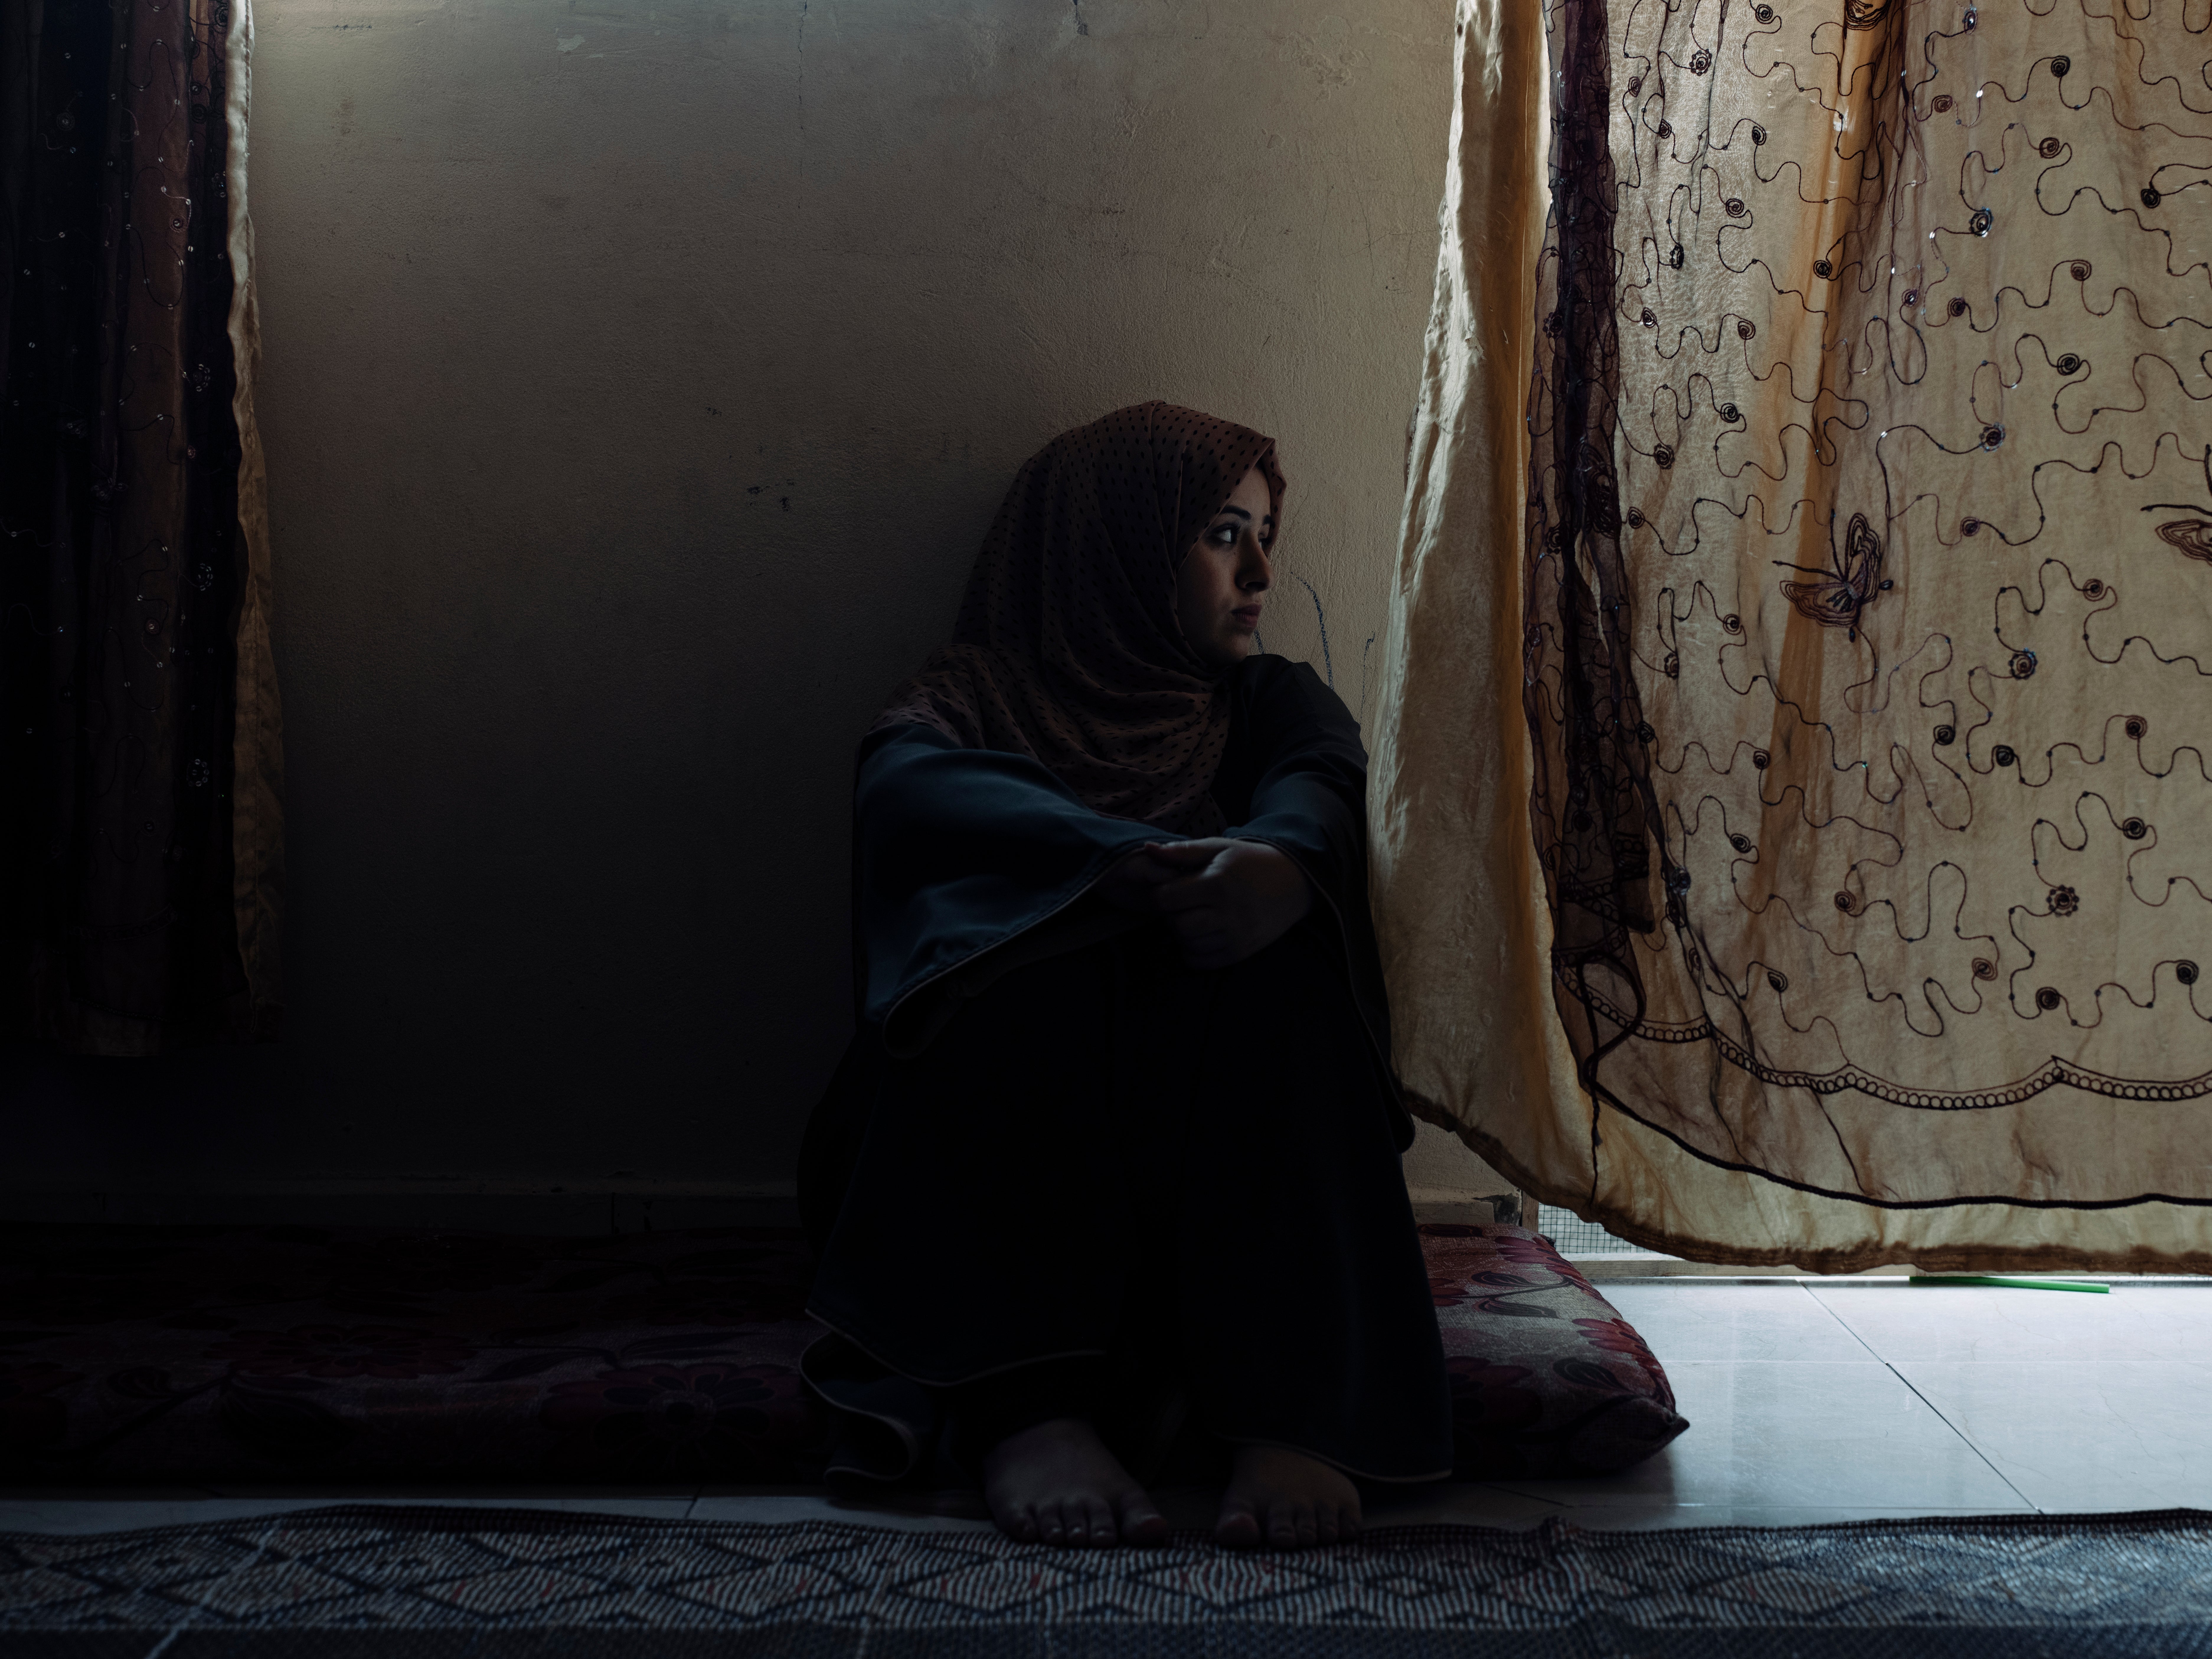 Nooha, 19, remembers the day her father was killed in 2014 by air strikes while on his way to buy food for the family, in the residential area of Fallujah